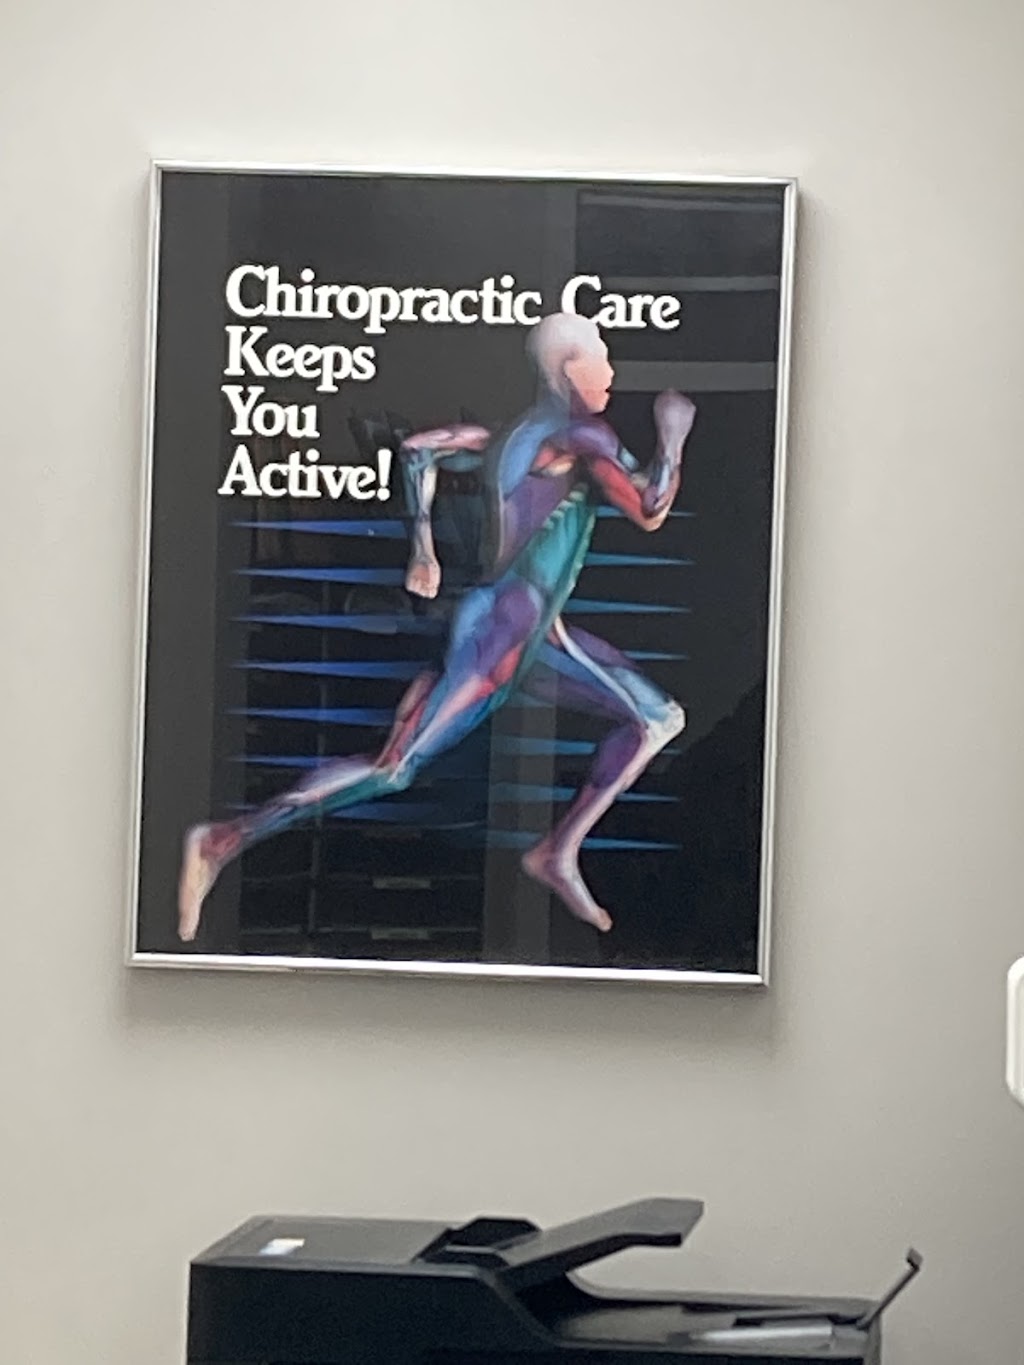 Somers Chiropractic Center | 322 NY-100, Somers, NY 10589 | Phone: (914) 276-2225